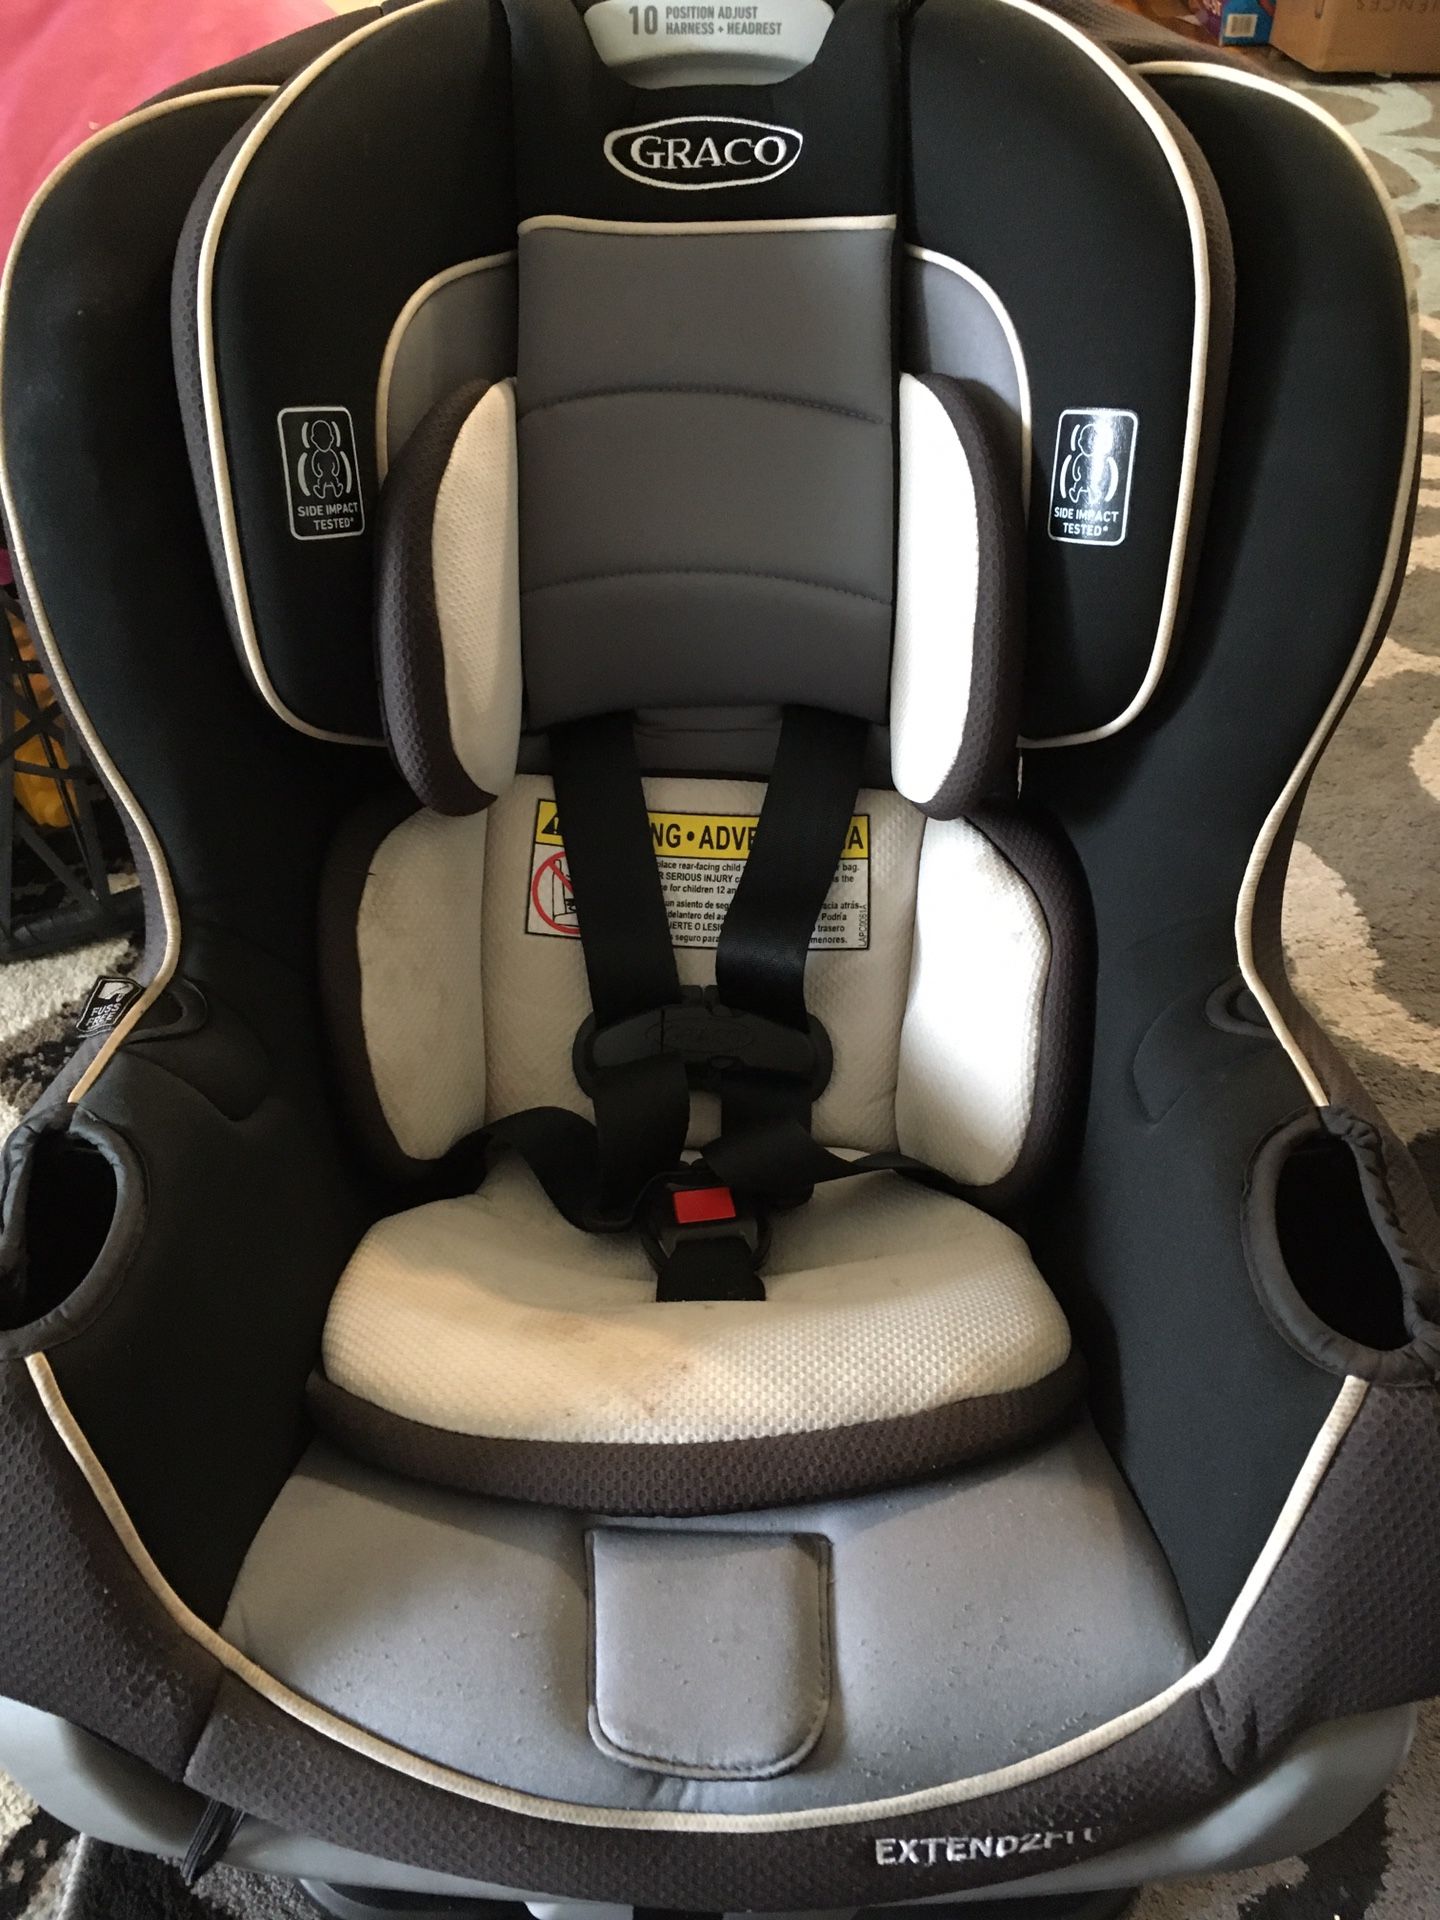 Graco Extend2Fit Convertible Car Seat Safely ride rear-facing longer!   Used - good condition   The Graco Extend2Fit Convertible Car Seat grows with y